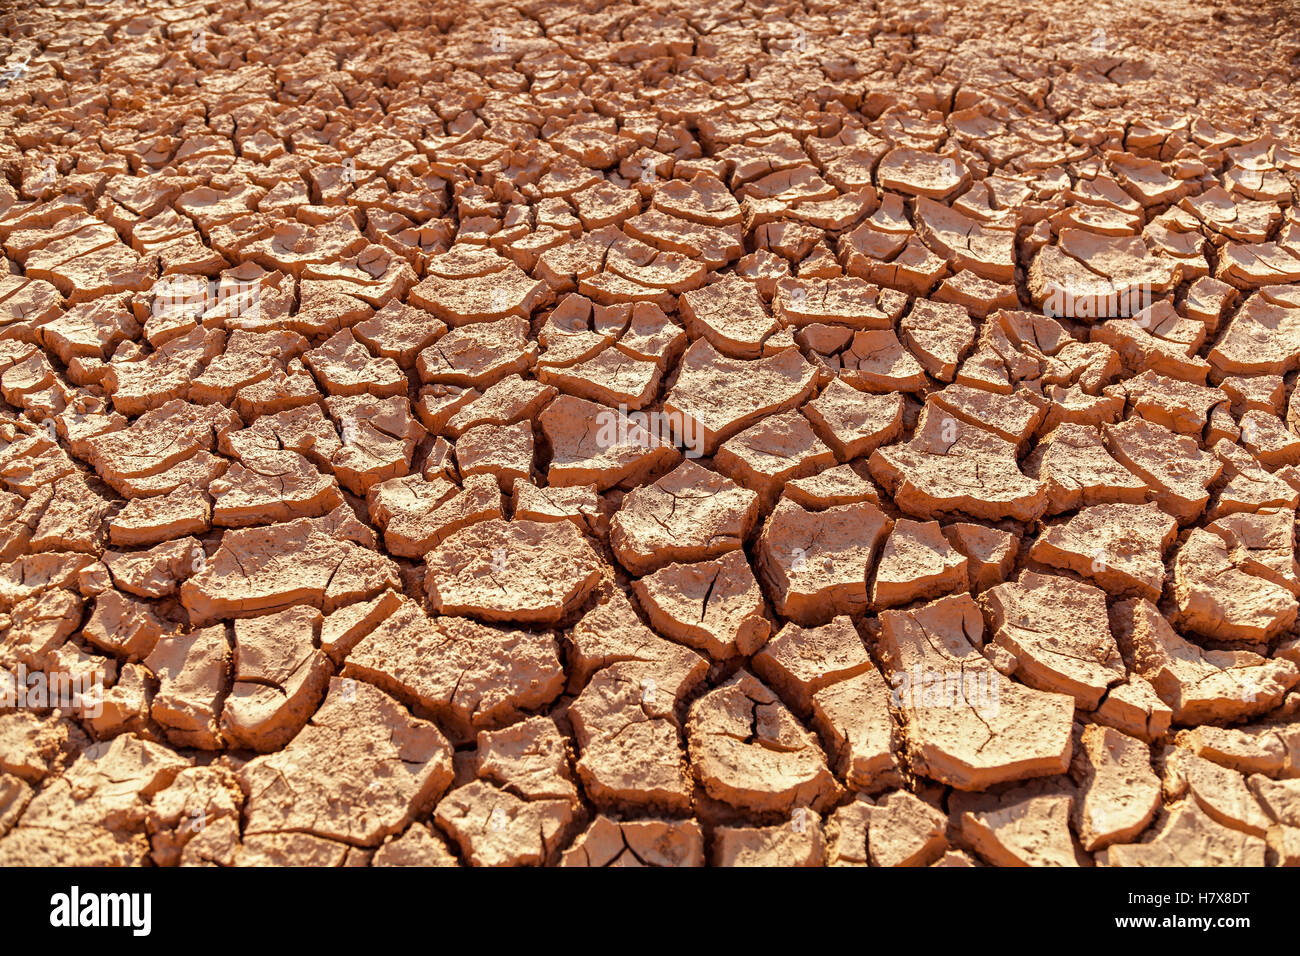 Parched earth.Land with dry cracked ground without water. Stock Photo